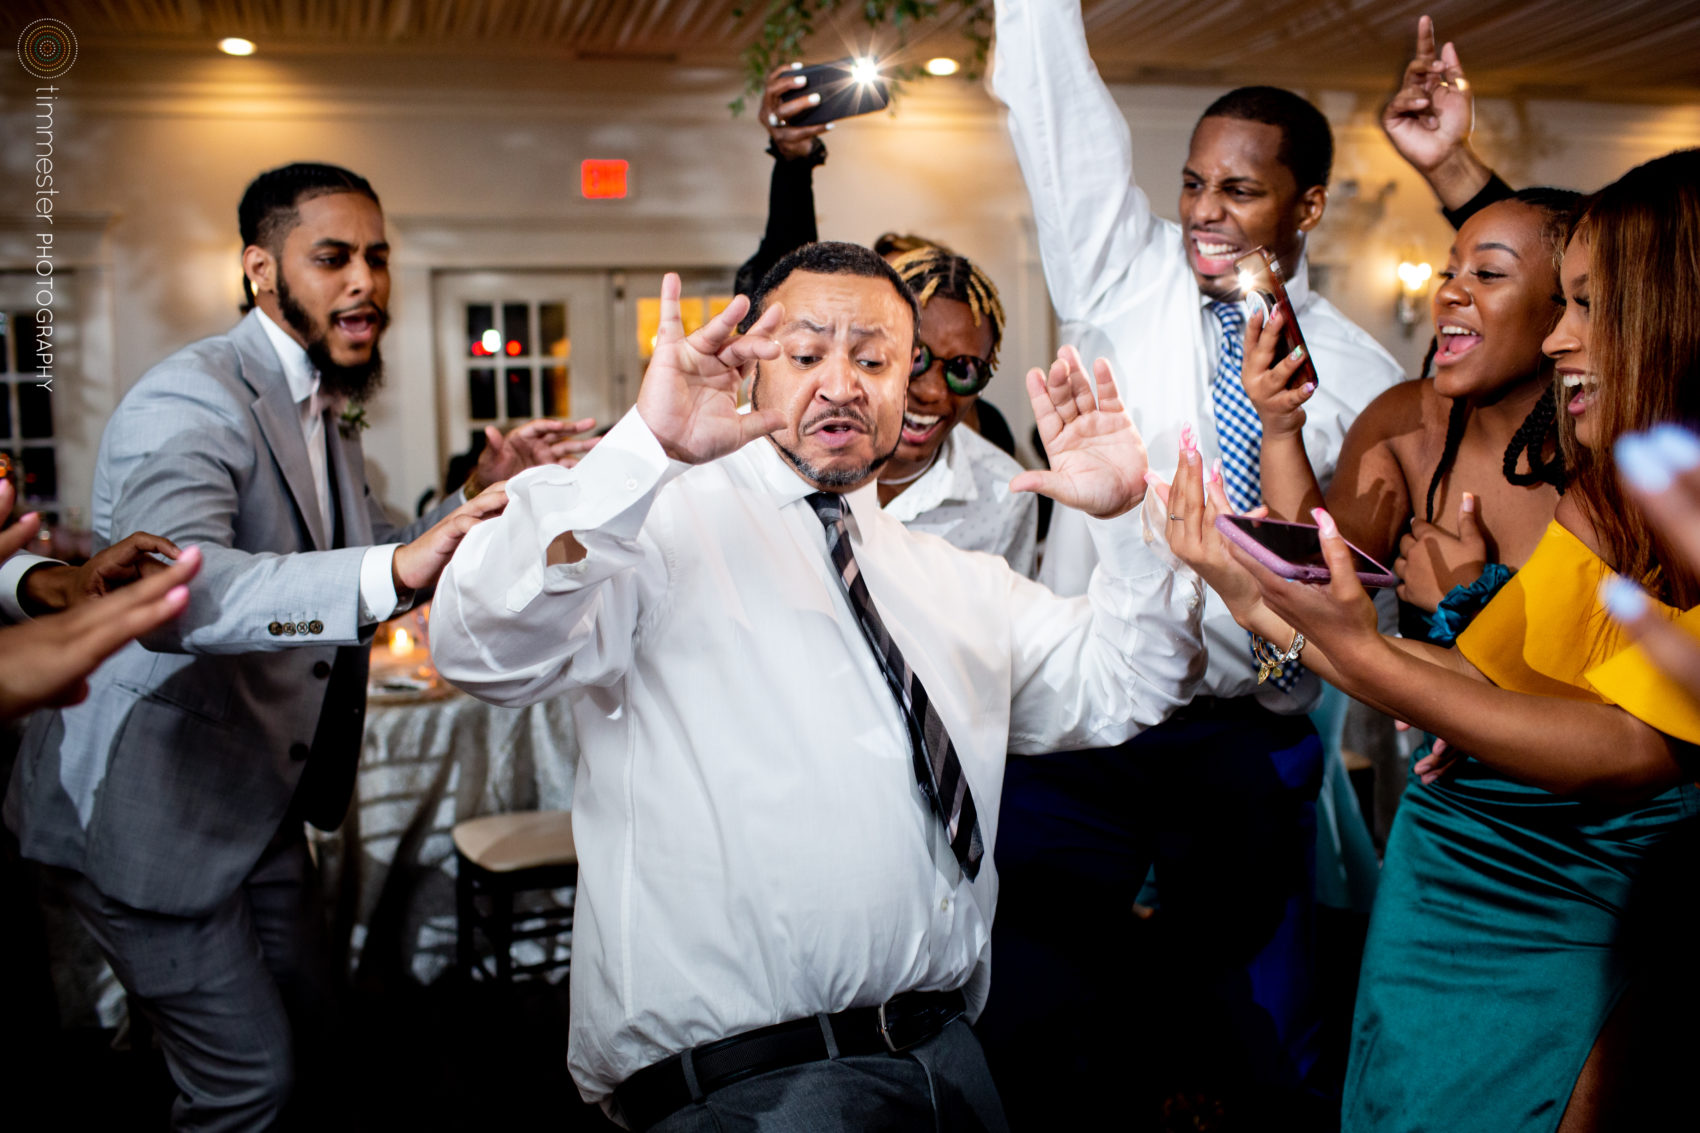 A fun wedding celebration and reception at Highgrove Estate in NC.